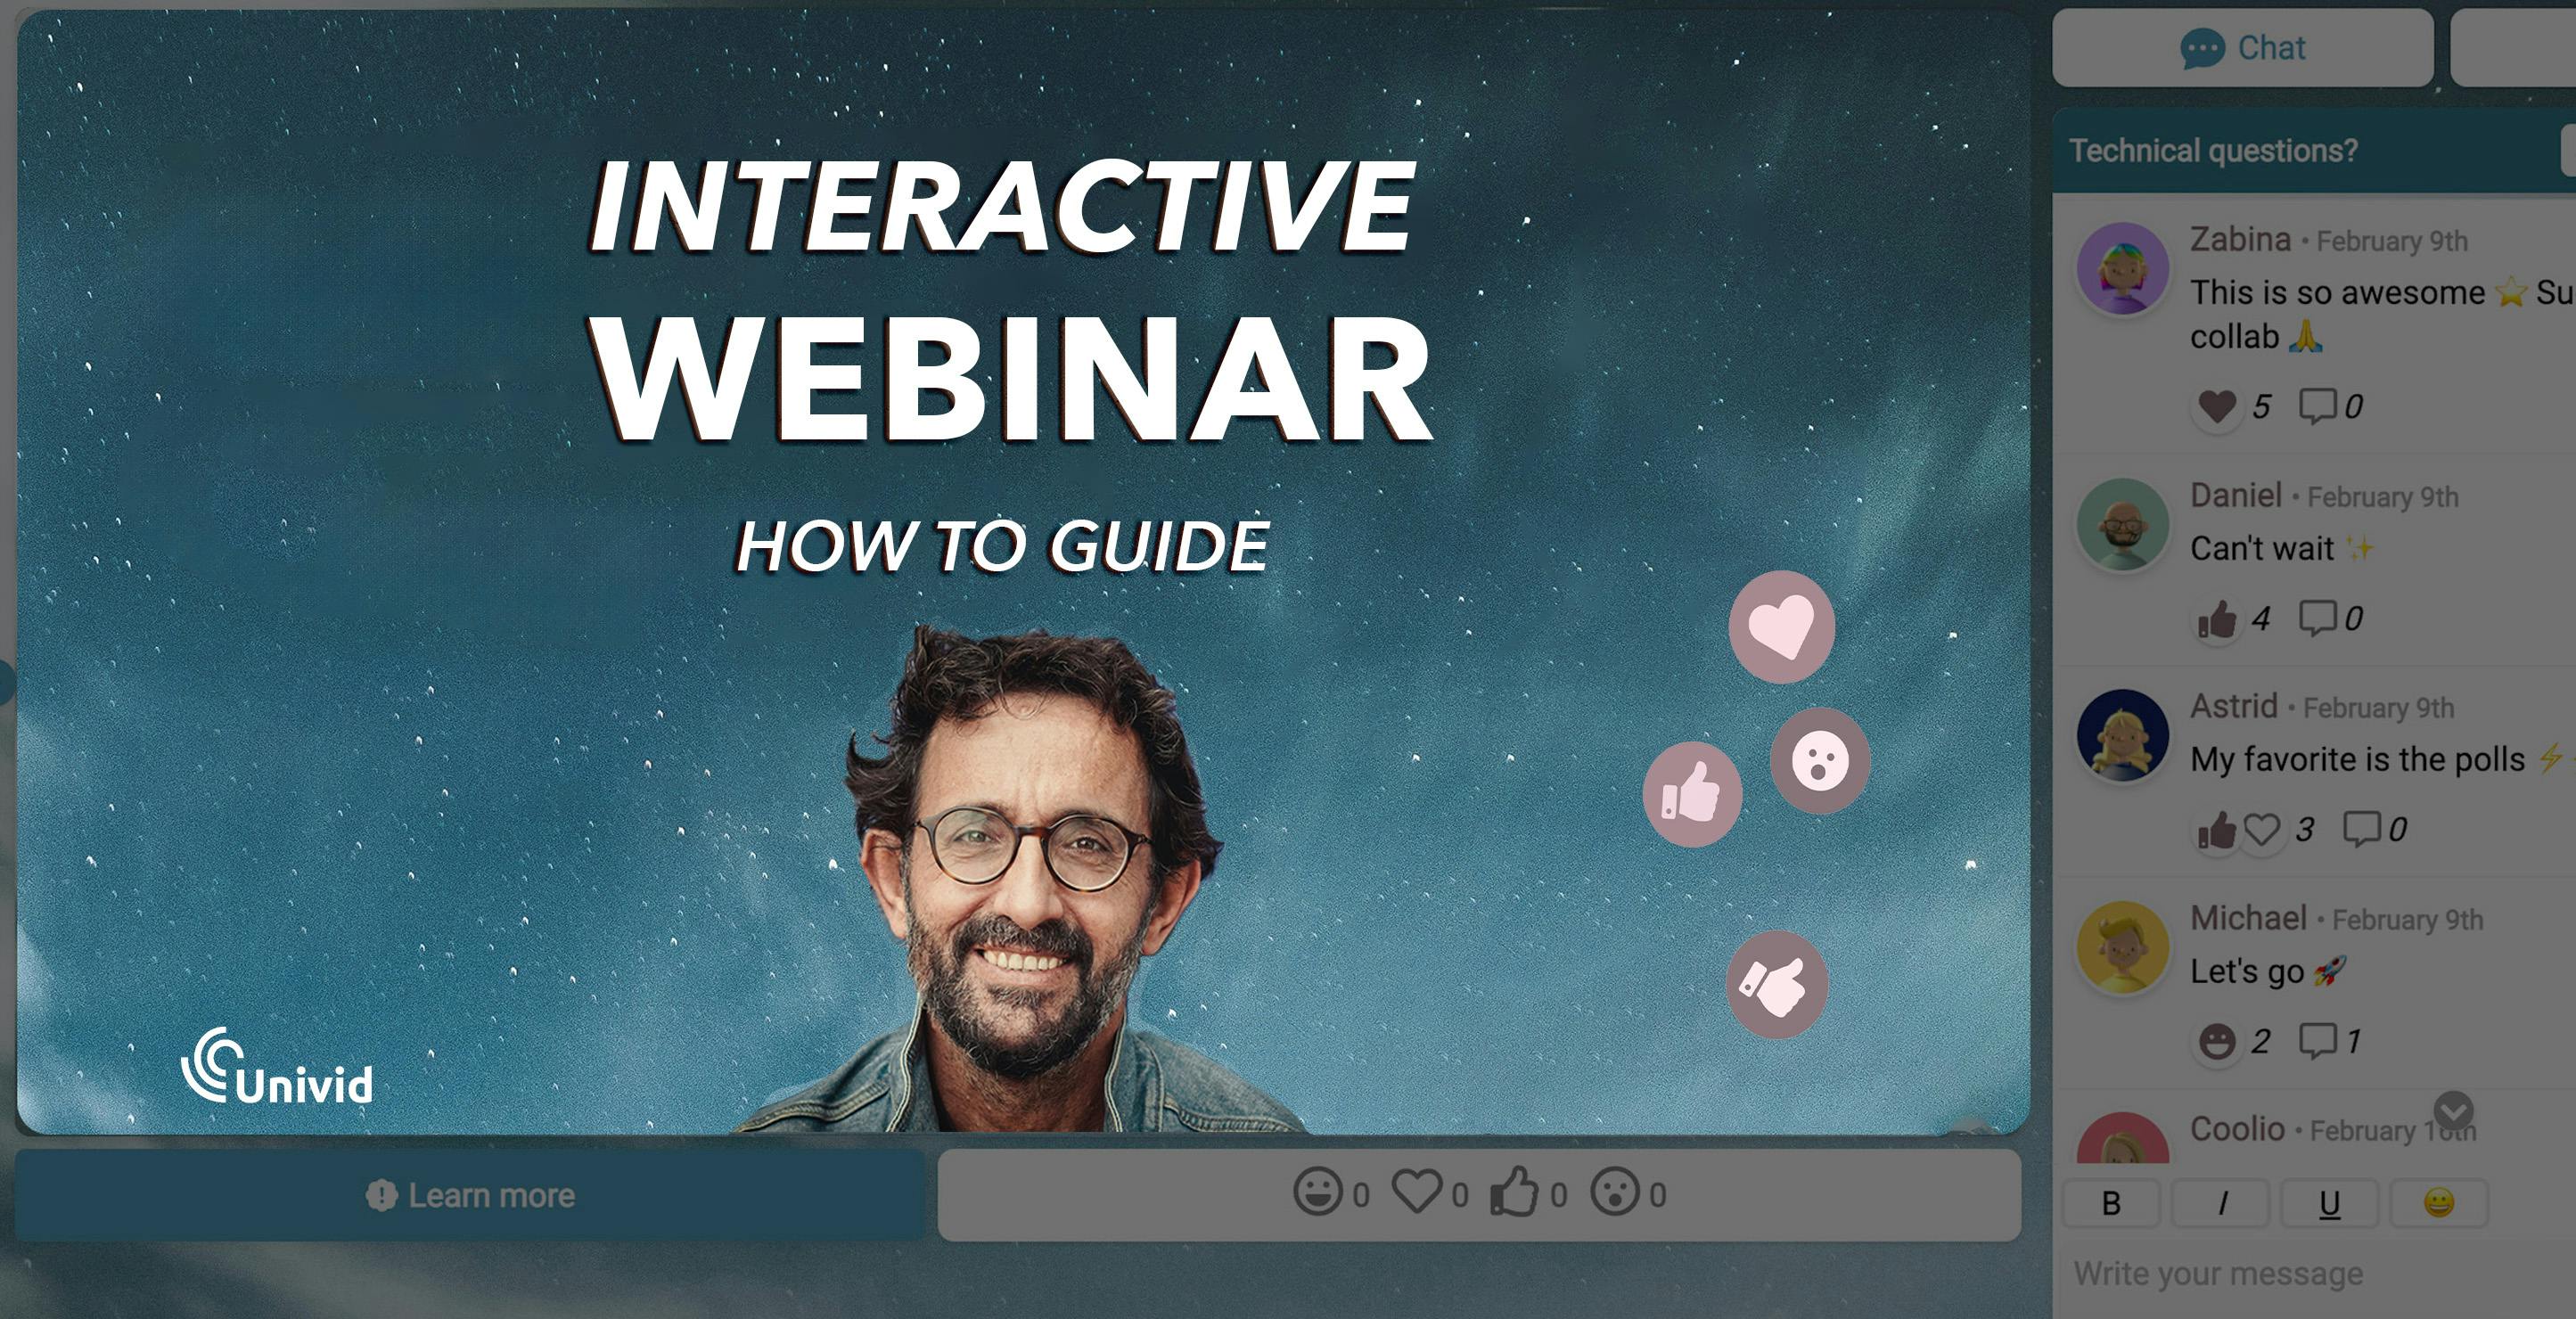 Tired of an empty Q&A? Design interactive webinars that your attendees will remember with these 5 proven tips for interaction. Learn how - and start making your webinars more interactive today.